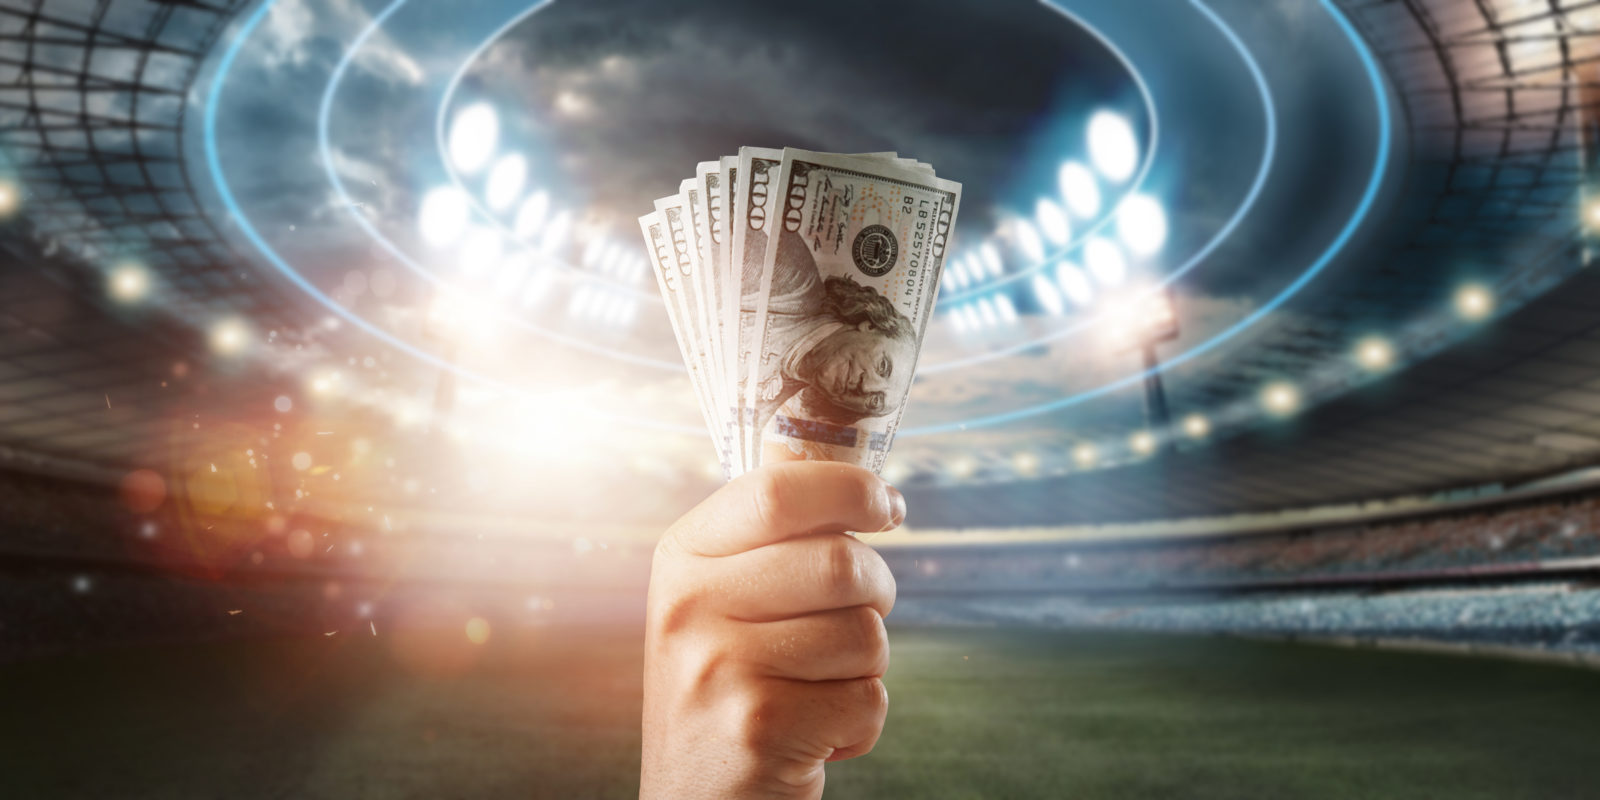 Close-up of a man's hand holding US dollars against the background of the stadium. The concept of sports betting, making a profit from betting, gambling. American football 2023/02/AdobeStock_408077810.jpeg 